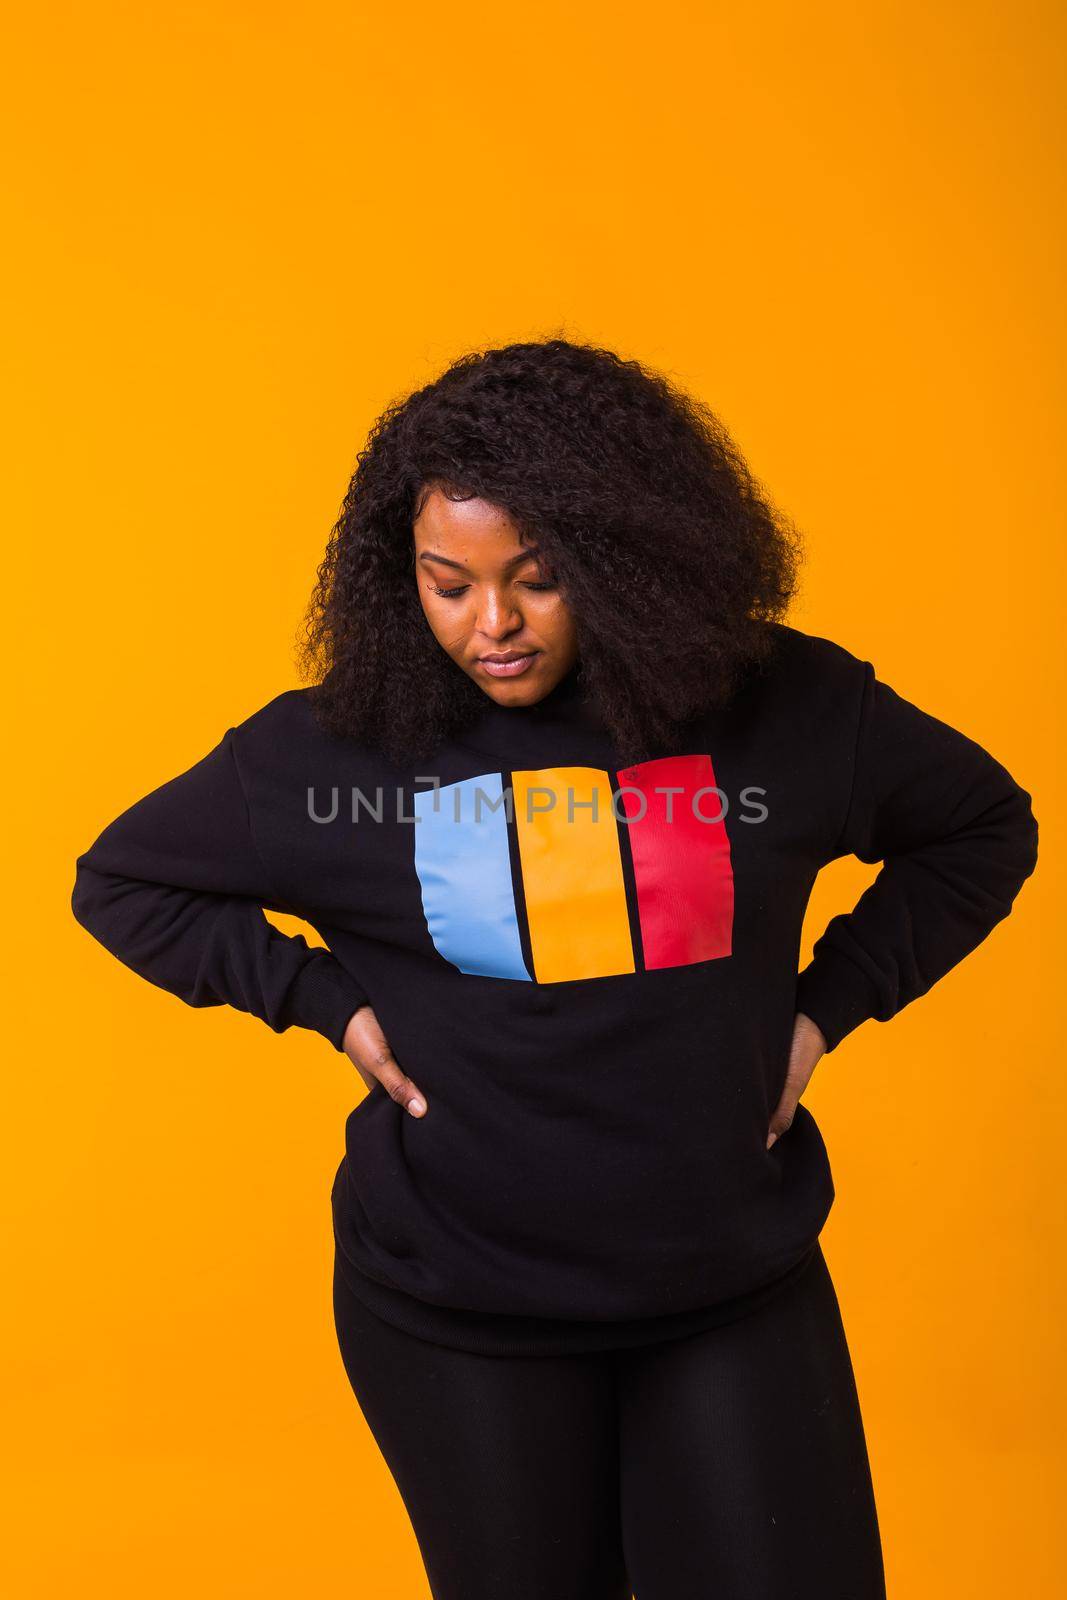 Beautiful African American woman posing in black hoodie on a yellow background. Fashion with afro hairstyle.